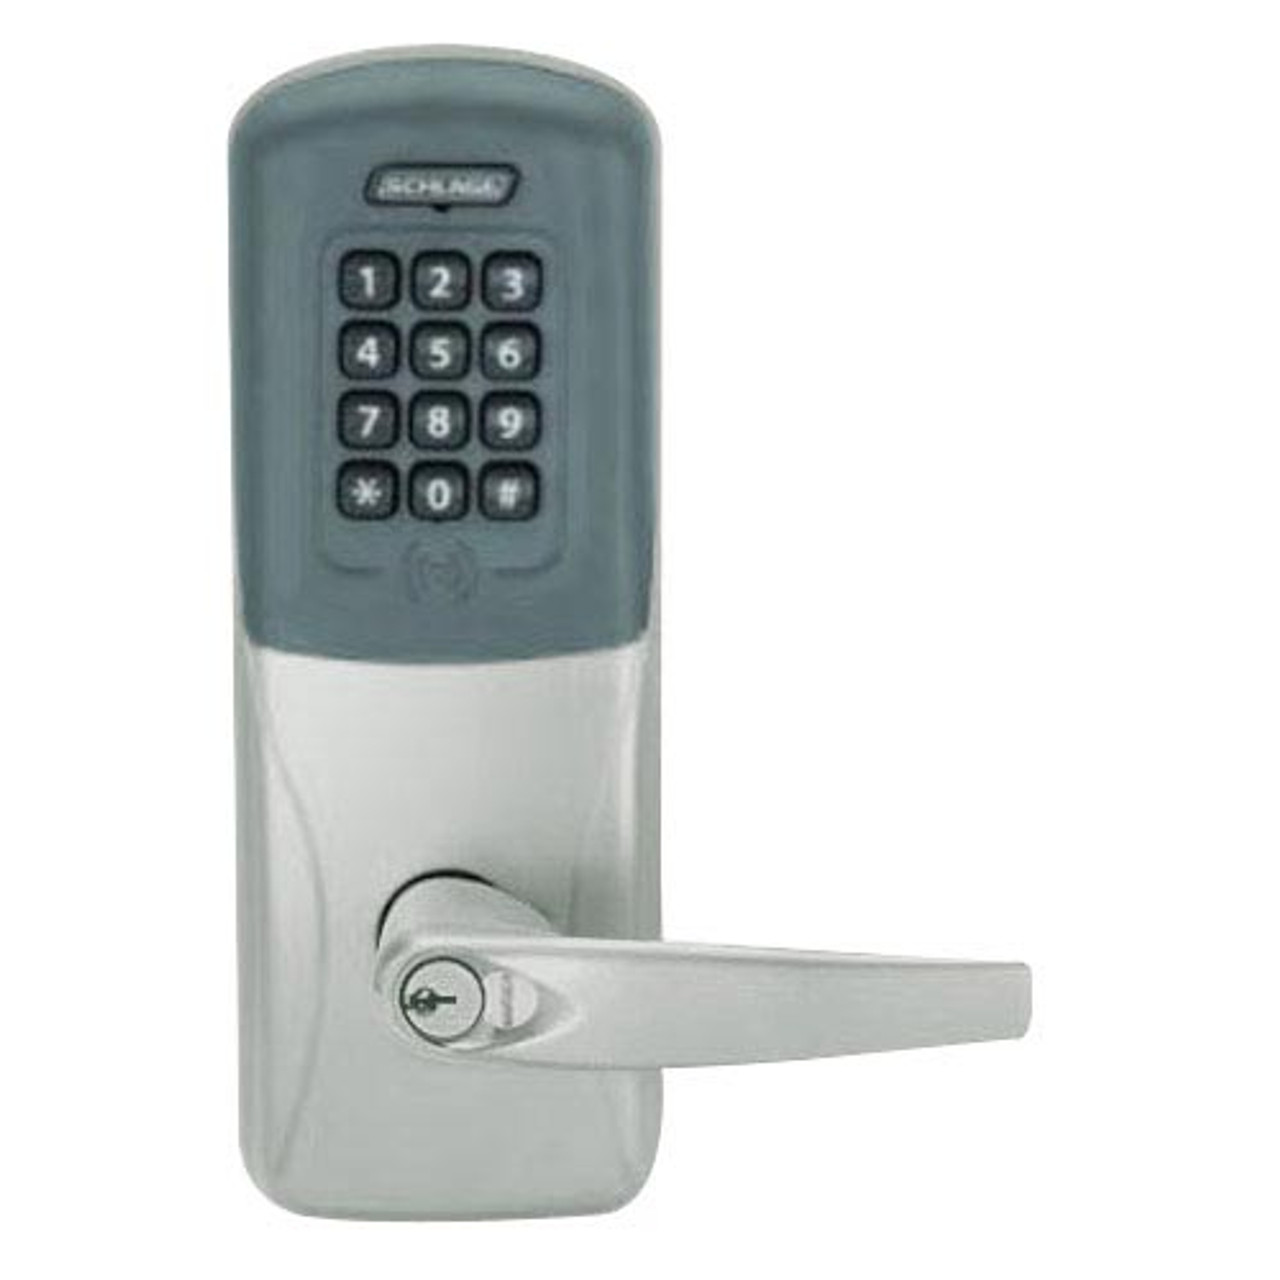 CO200-MD-40-PRK-ATH-GD-29R-619 Mortise Deadbolt Standalone Electronic Proximity with Keypad Locks in Satin Nickel